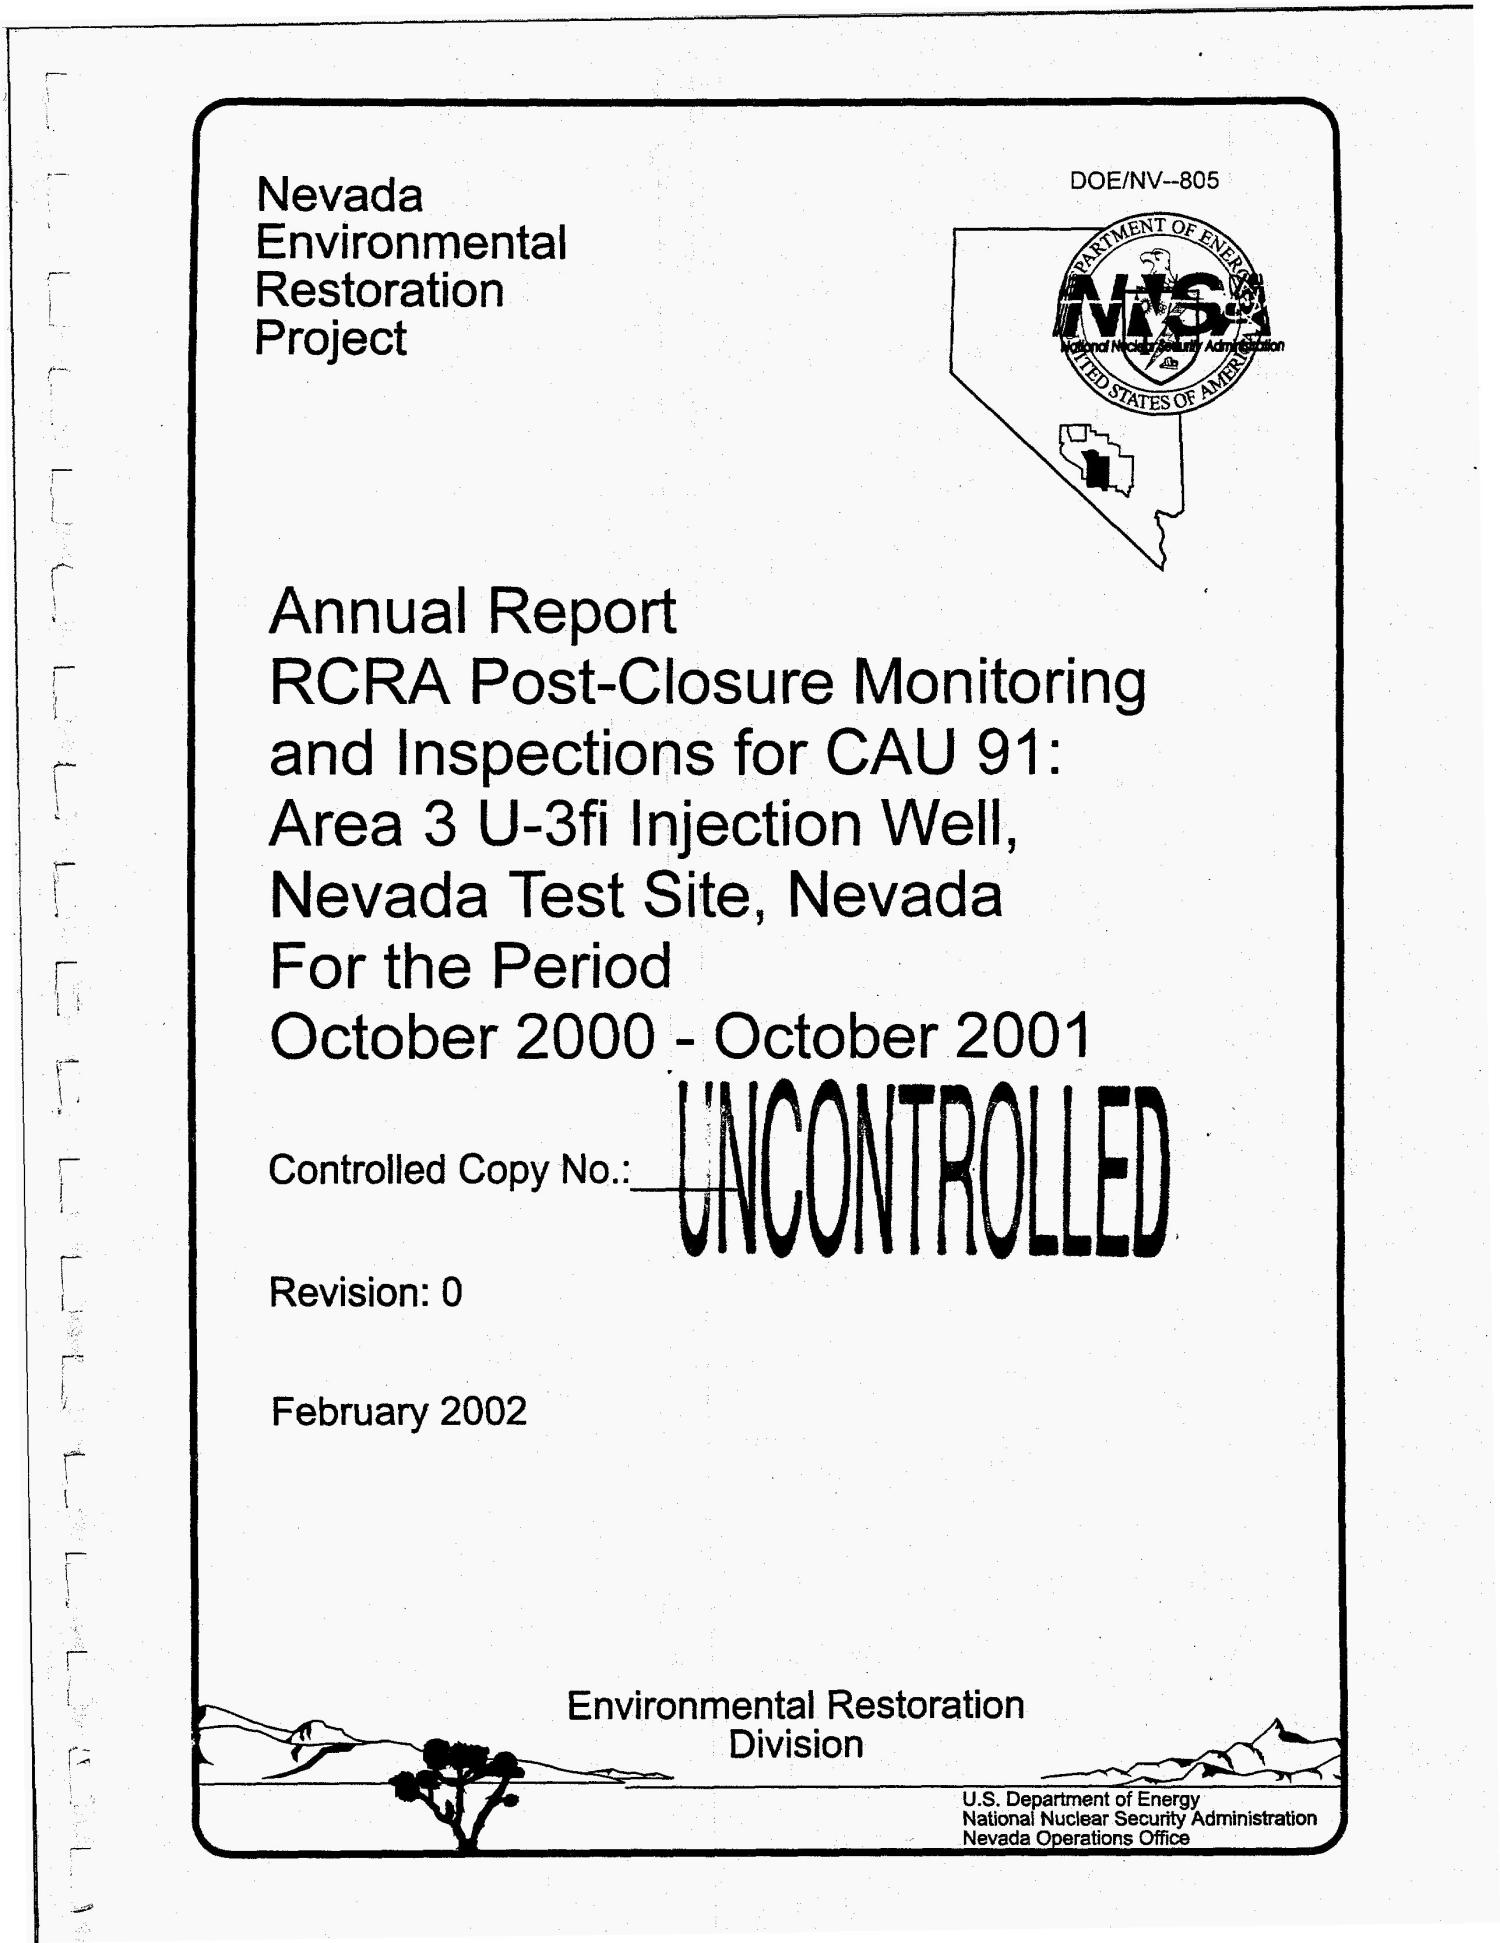 Annual Report RCRA Post-Closure Monitoring and Inspections for CAU 91: Area 3 U-3fi Injection Well, Nevada Test Site, Nevada, for the period October 2000-October 2001
                                                
                                                    [Sequence #]: 1 of 95
                                                